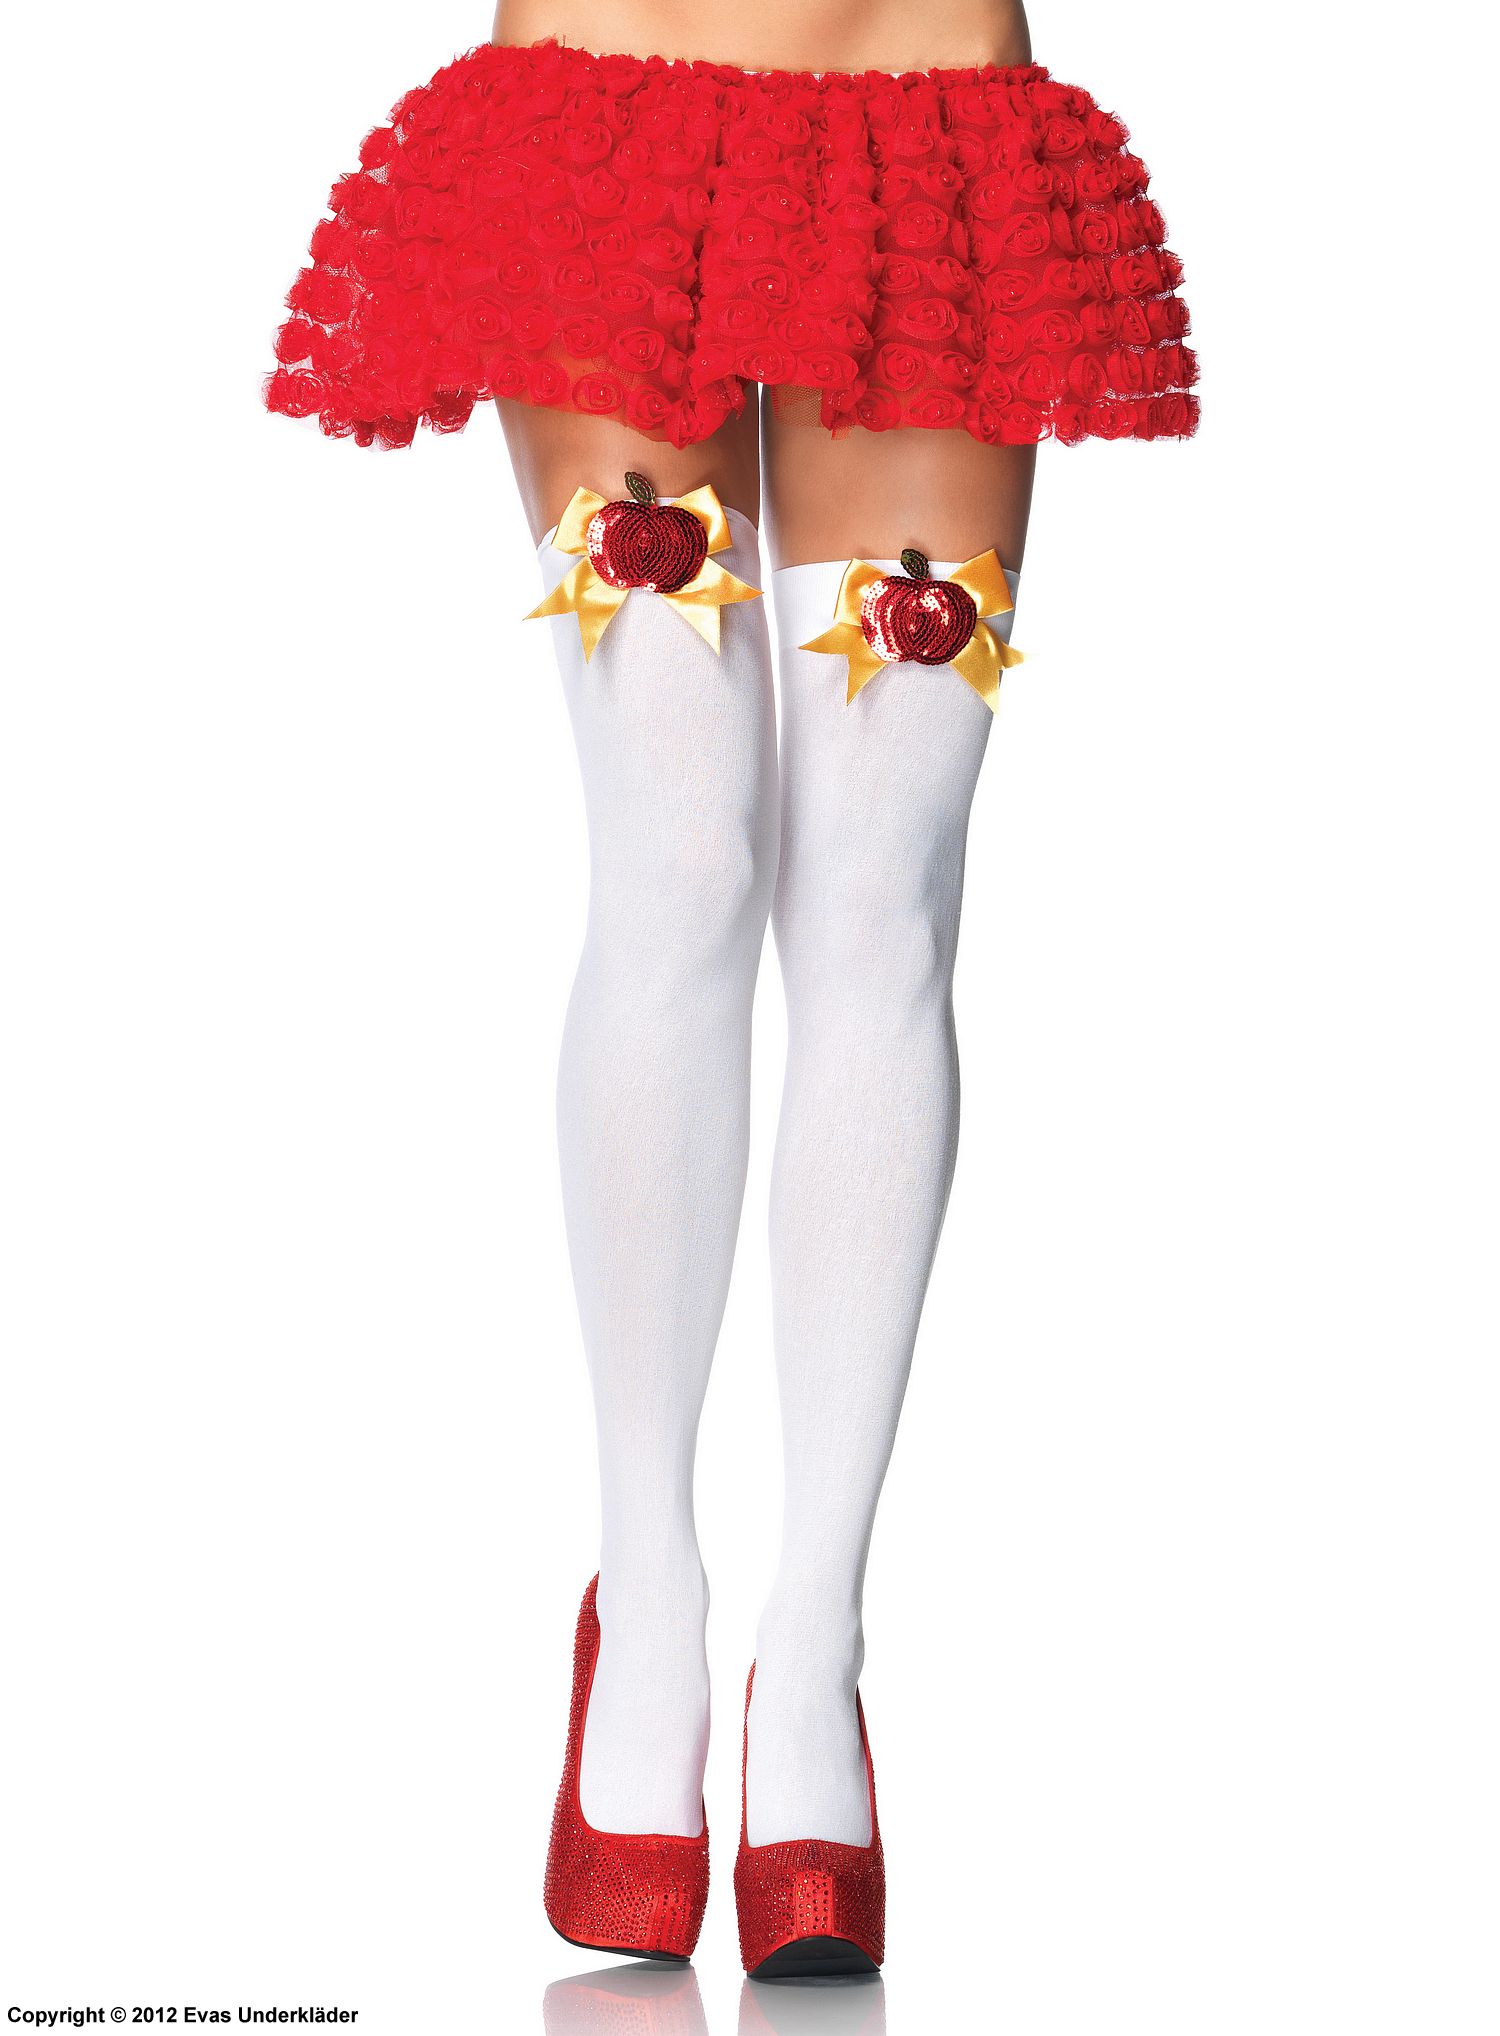 Thigh high stockings, big bow, sequin apple